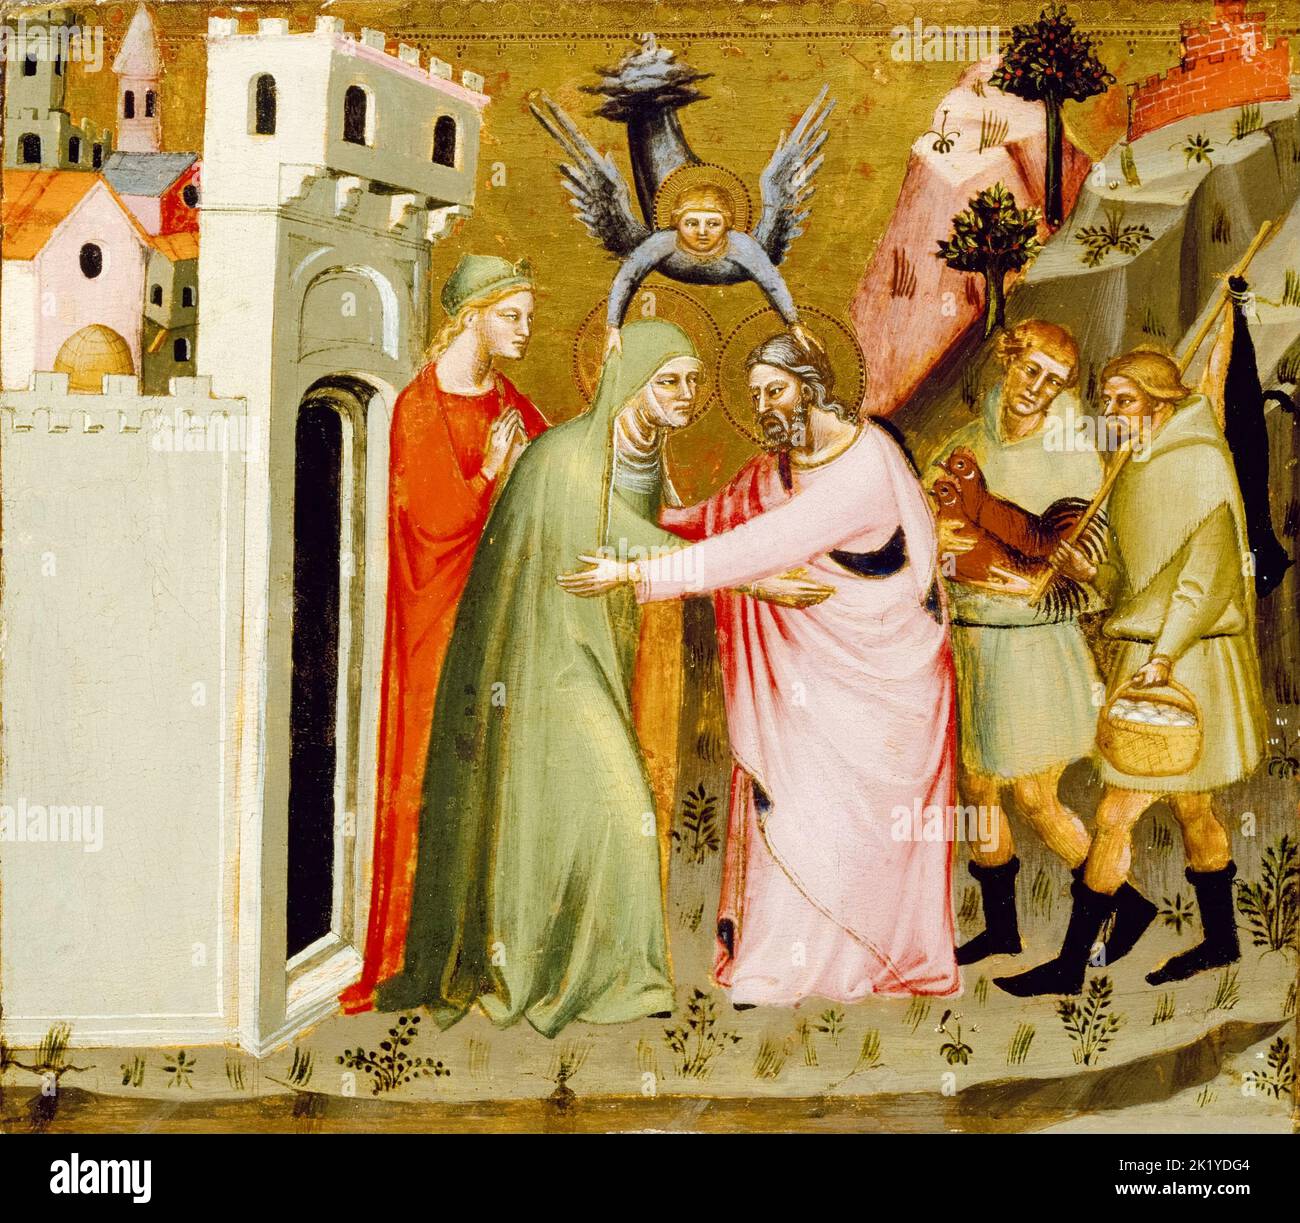 The Meeting of Anna and Joachim at the Golden Gate, painting in tempera and gold leaf on wood by Master of the Golden Gate, 1370-1390 Stock Photo